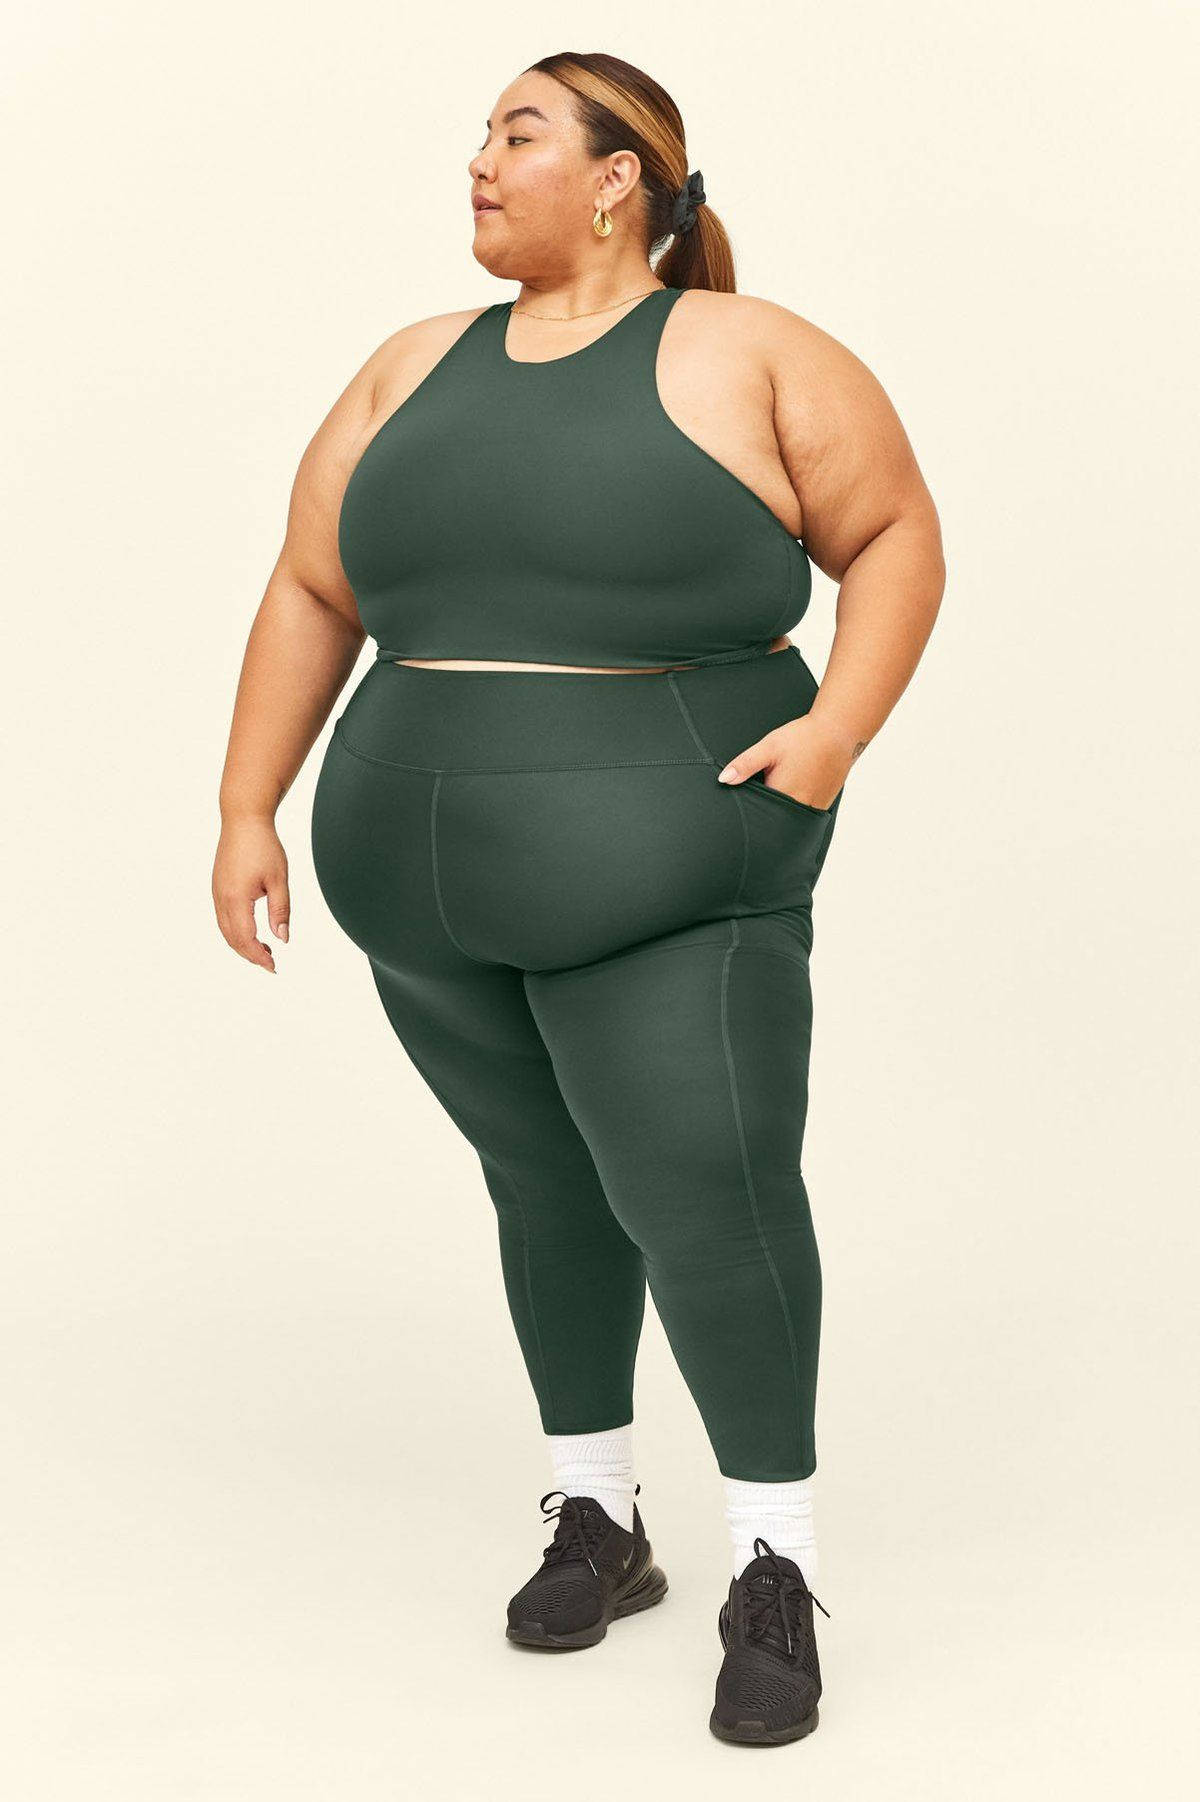 Download Fat Woman In Green Workout Clothes Wallpaper